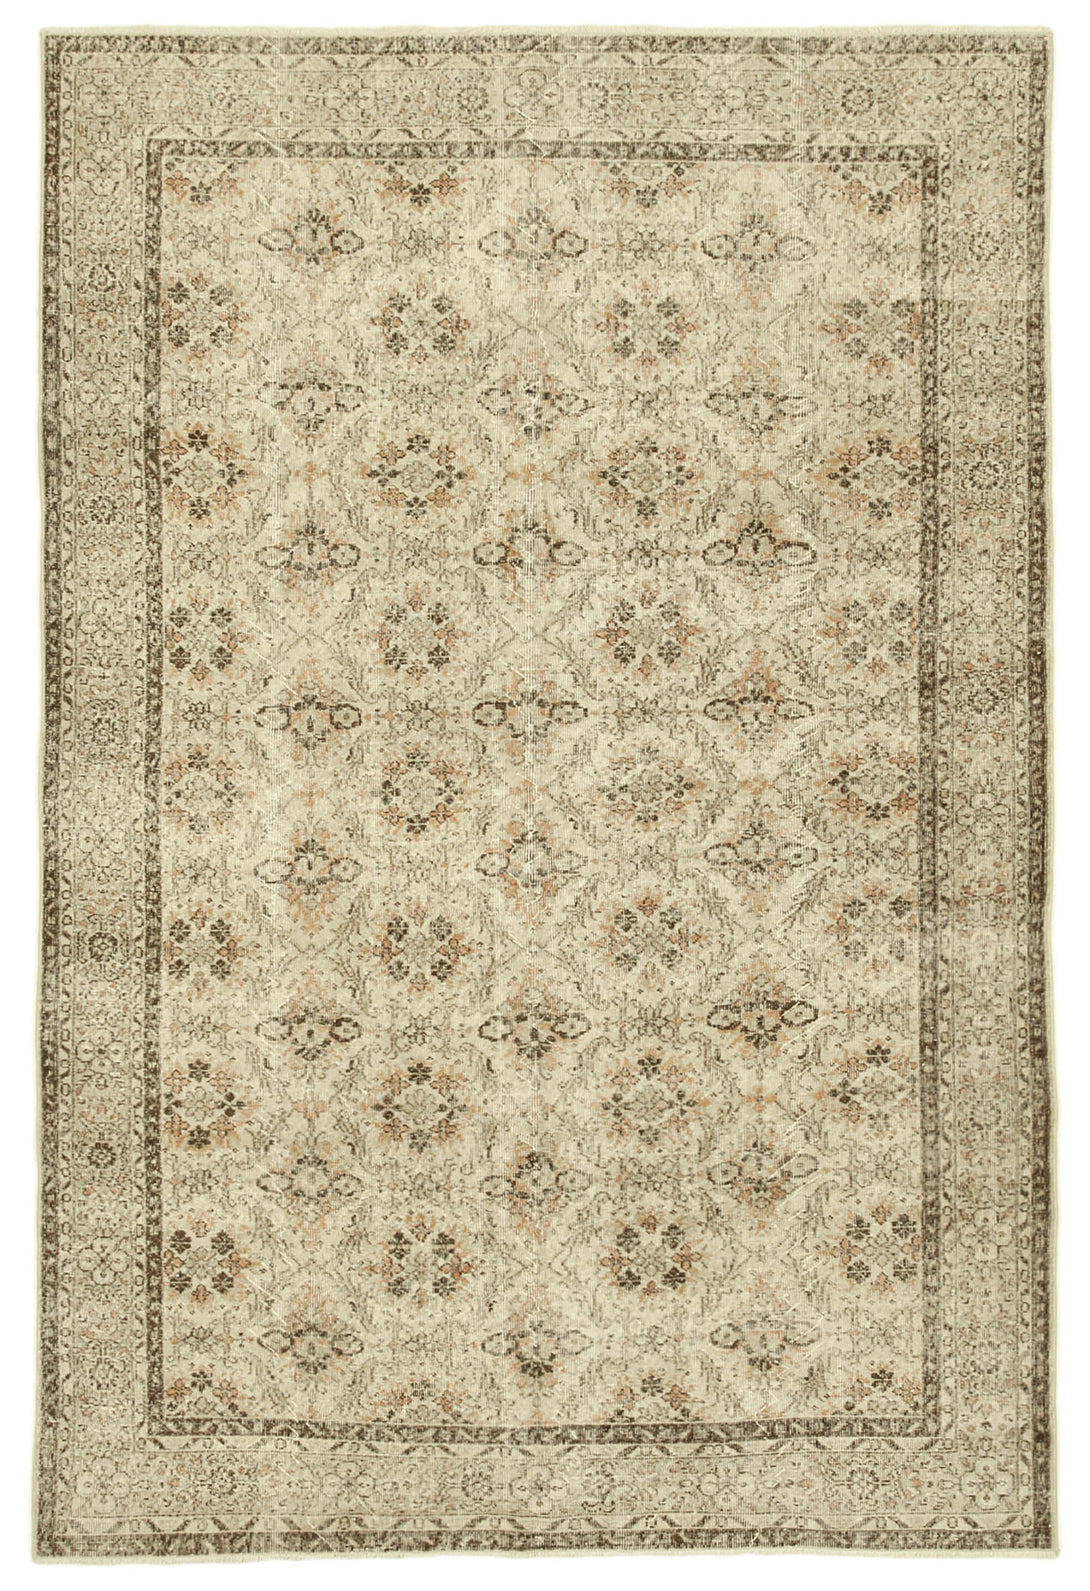 Handmade White Wash Area Rug > Design# OL-AC-38828 > Size: 6'-9" x 10'-6", Carpet Culture Rugs, Handmade Rugs, NYC Rugs, New Rugs, Shop Rugs, Rug Store, Outlet Rugs, SoHo Rugs, Rugs in USA